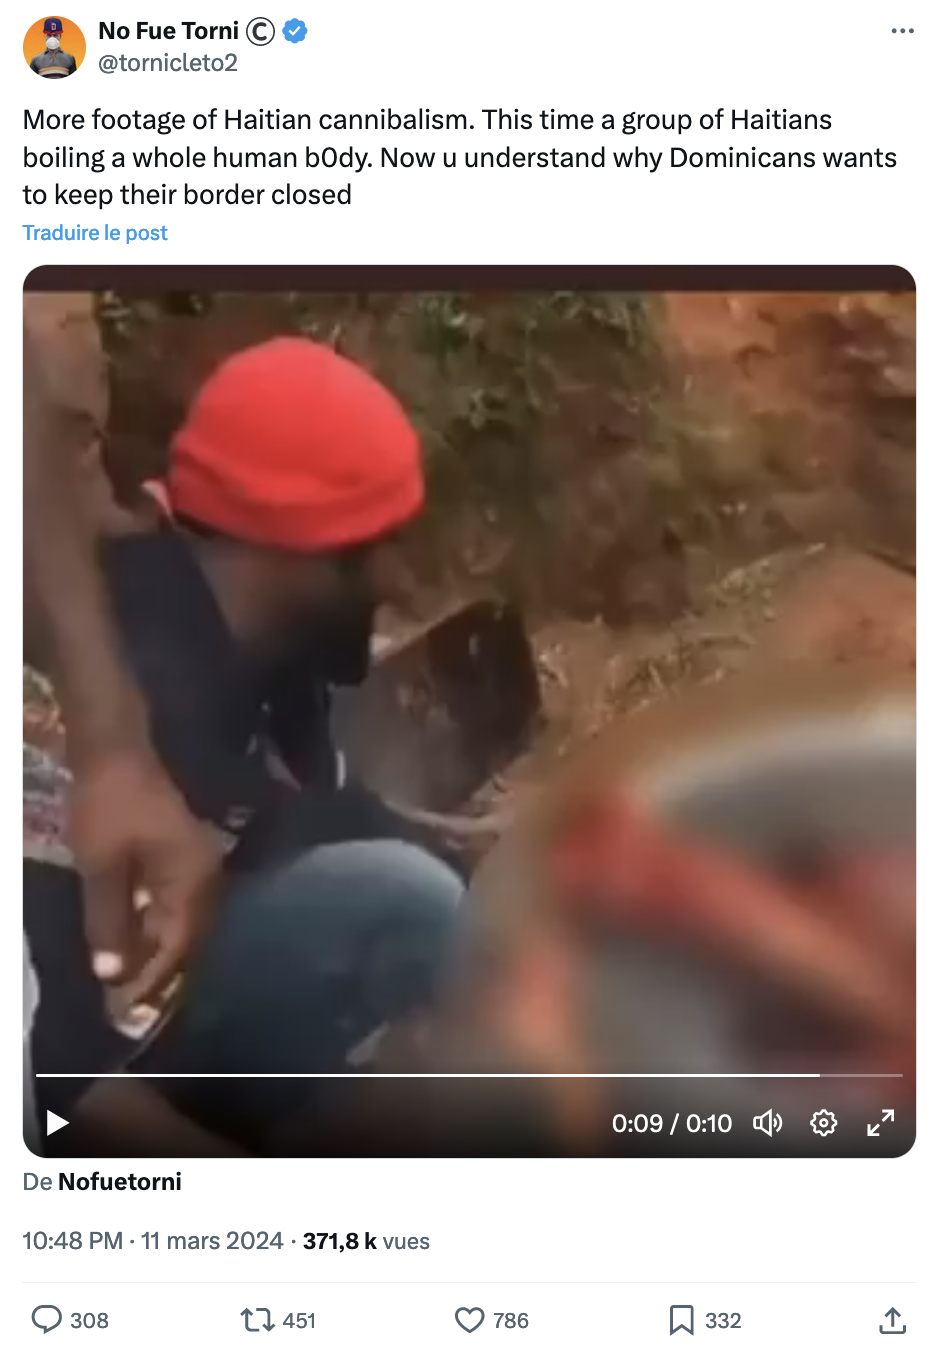 This tweet from March 11, 2024 claims that the attached video shows cannibalism in Haiti. However, it was actually filmed on a film set in Nigeria back in 2018, and it doesn’t show a real case of cannibalism.